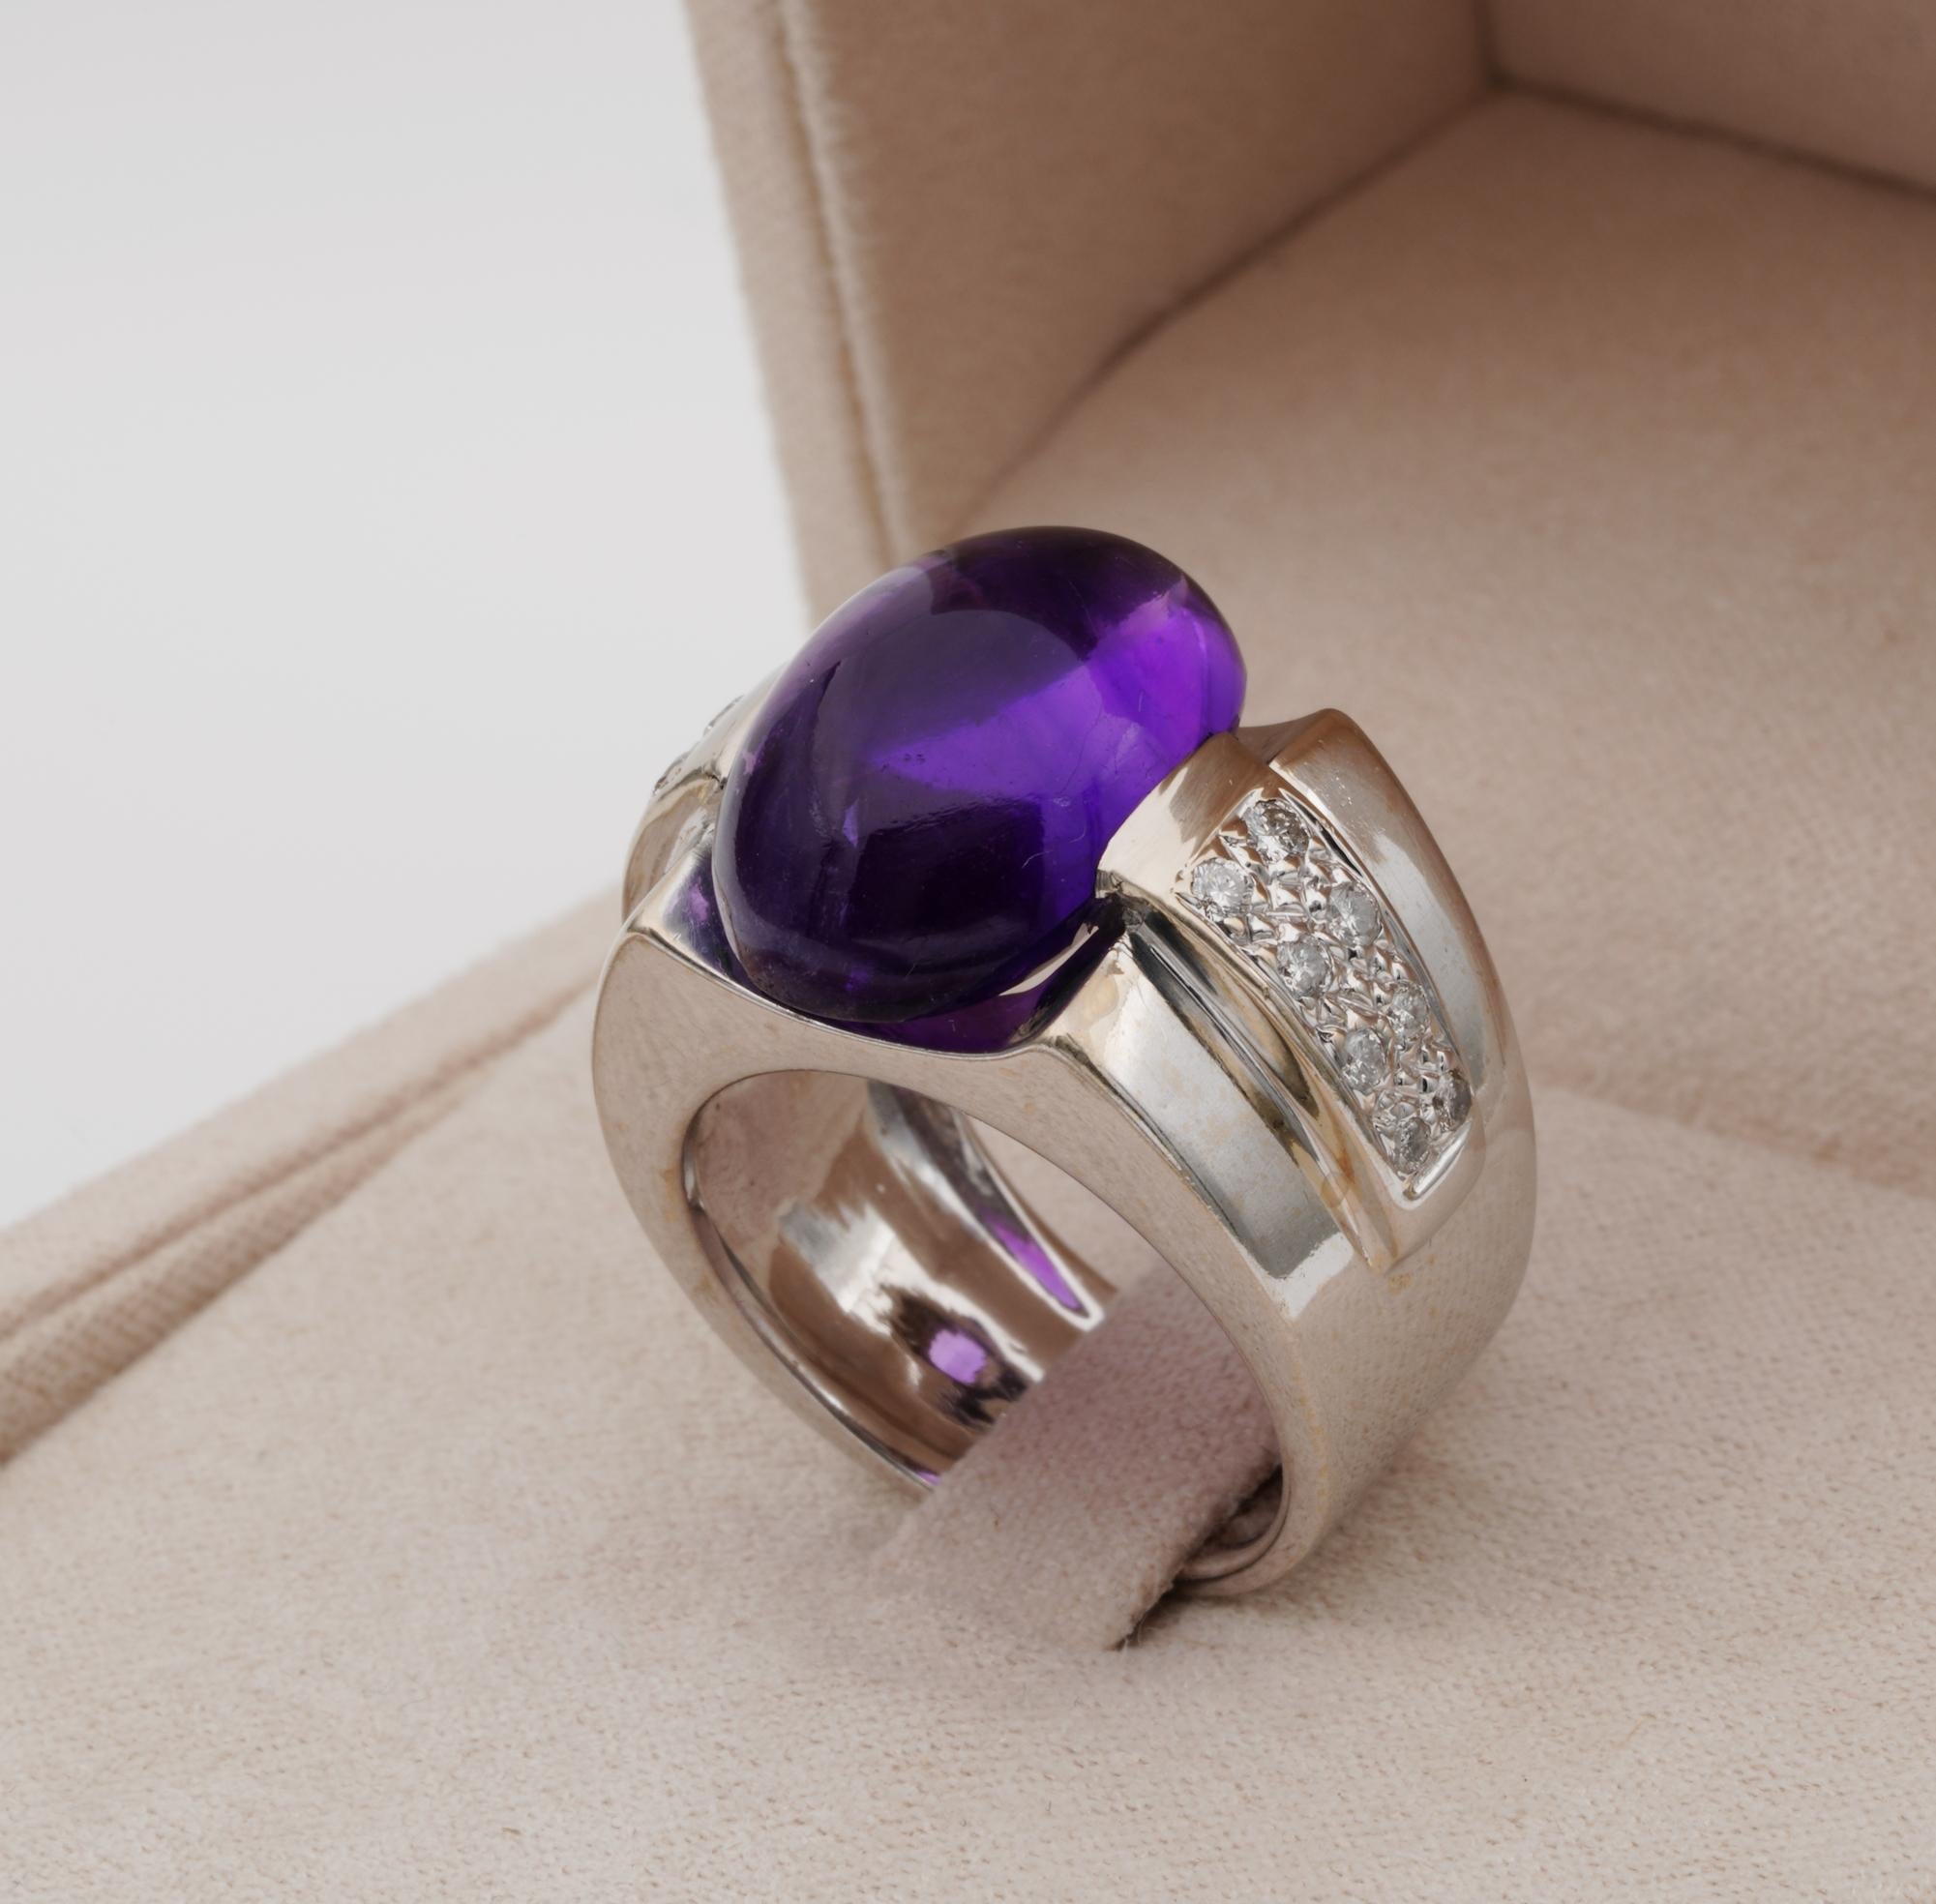 Cabochon Art Deco 10.00 Ct Natural Amethyst Diamond 18 KT Ring For Sale